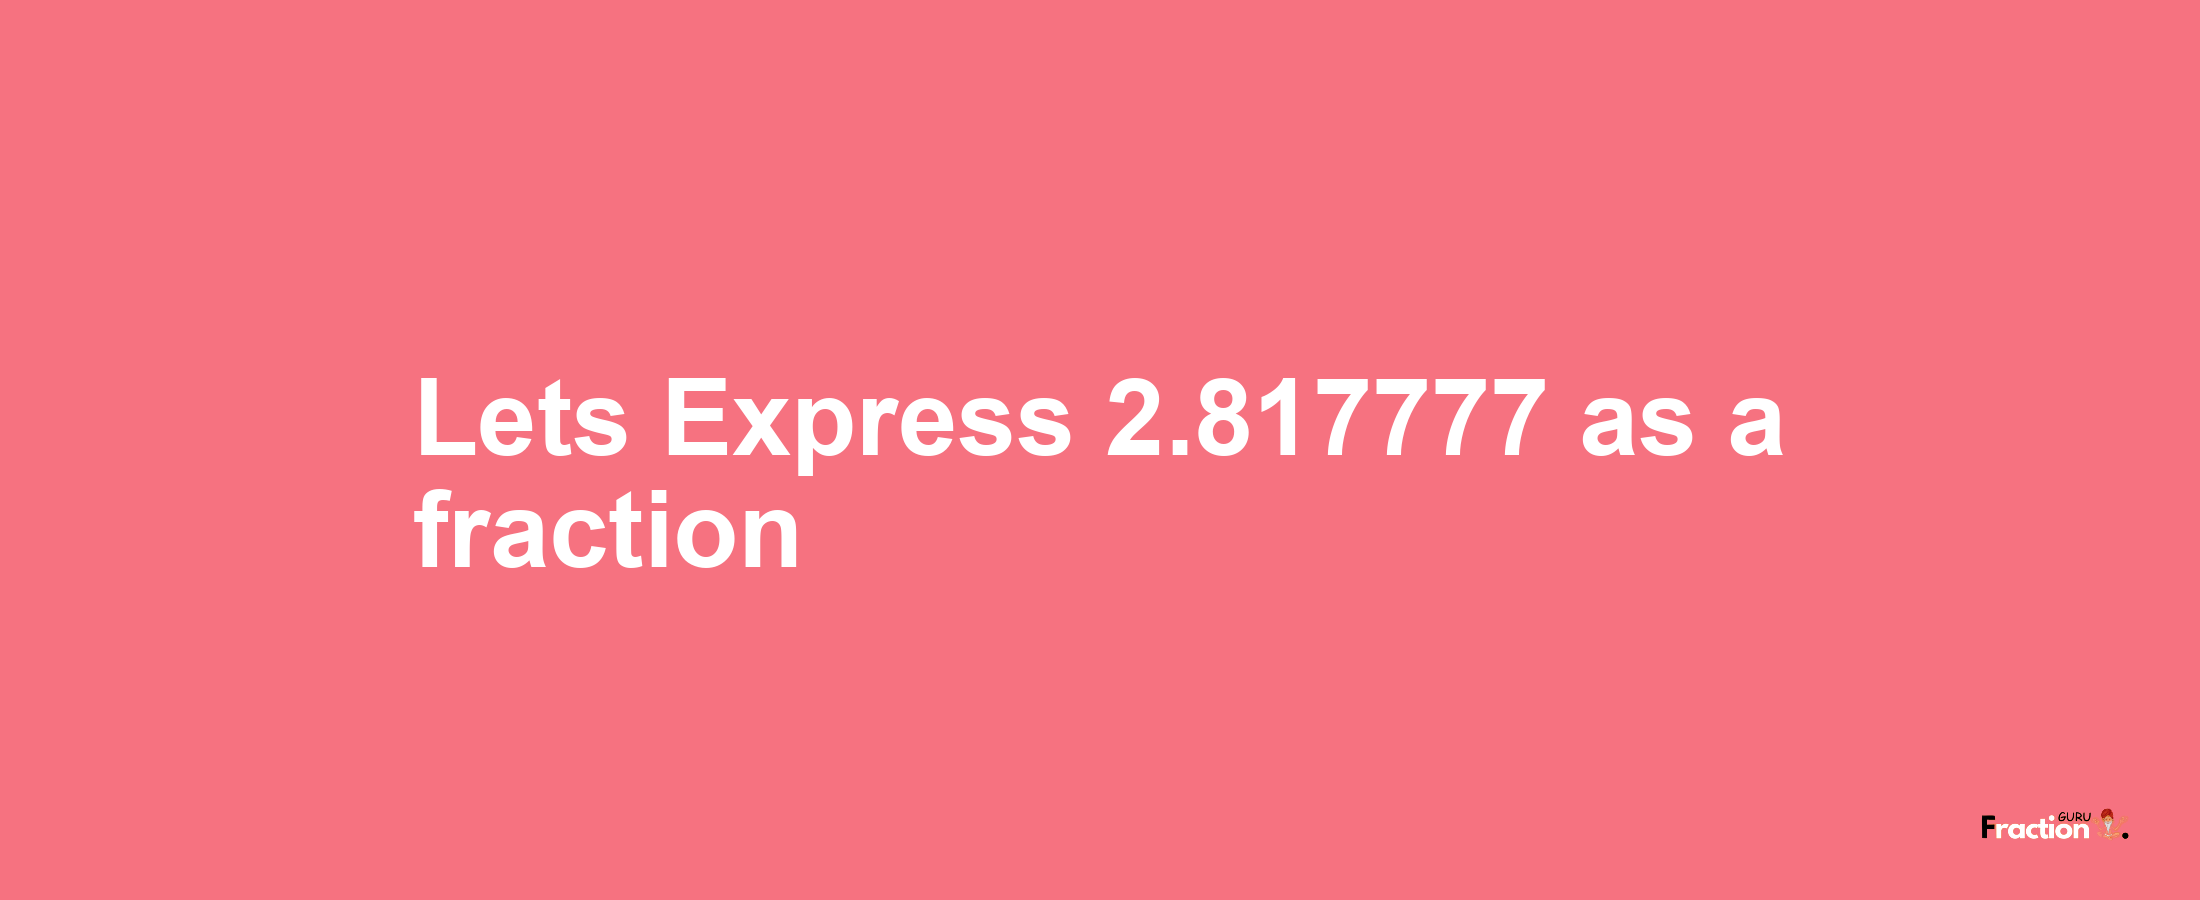 Lets Express 2.817777 as afraction